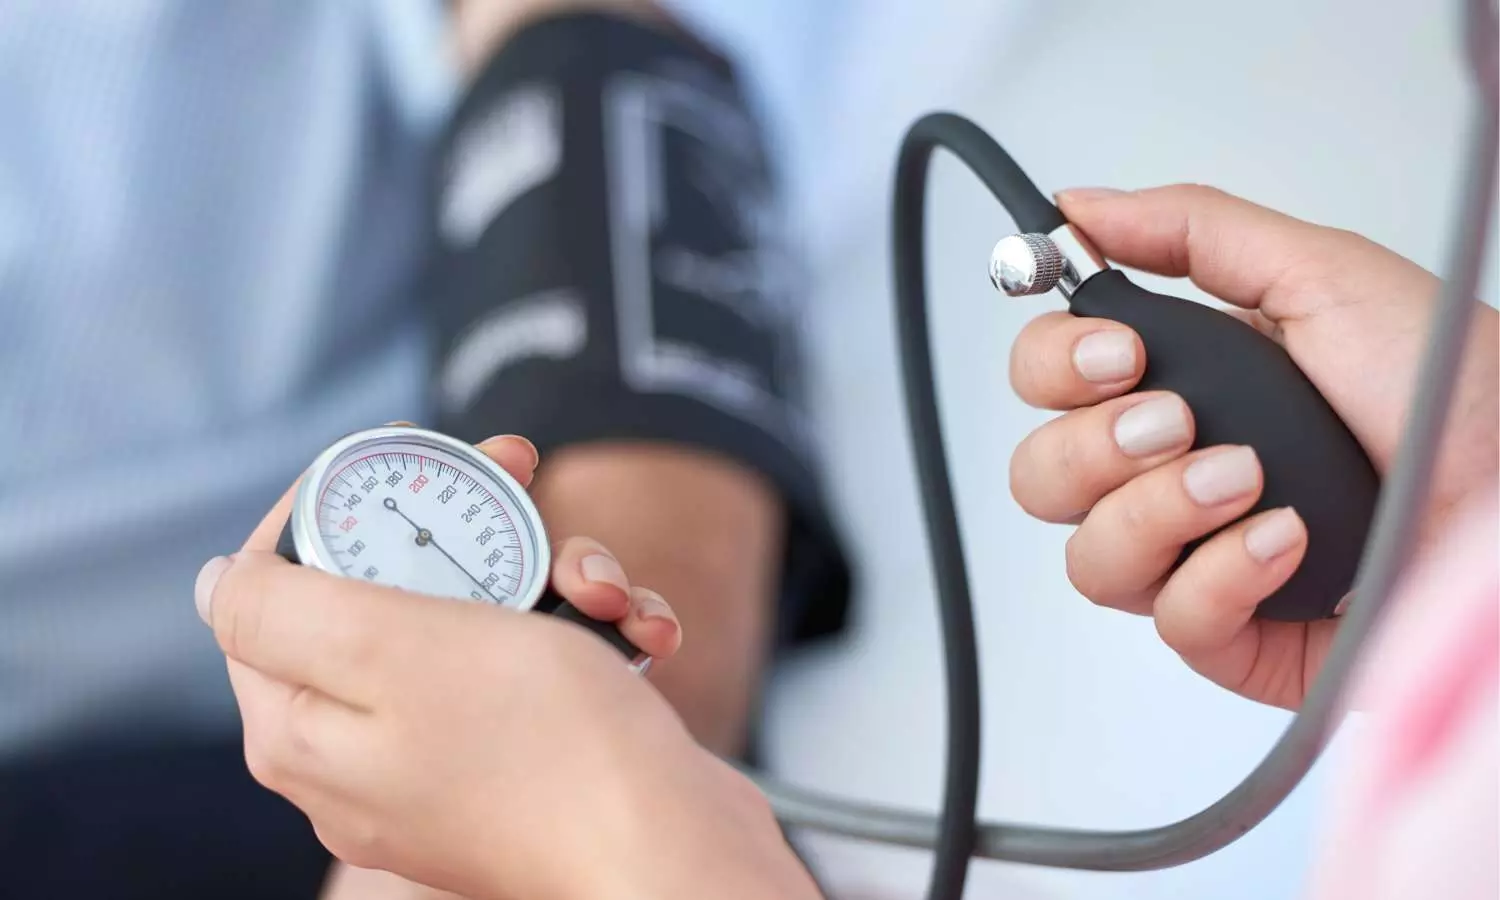 Keeping Blood pressure under control curbs neurotic behaviours, anxiety, and CVD: BMJ